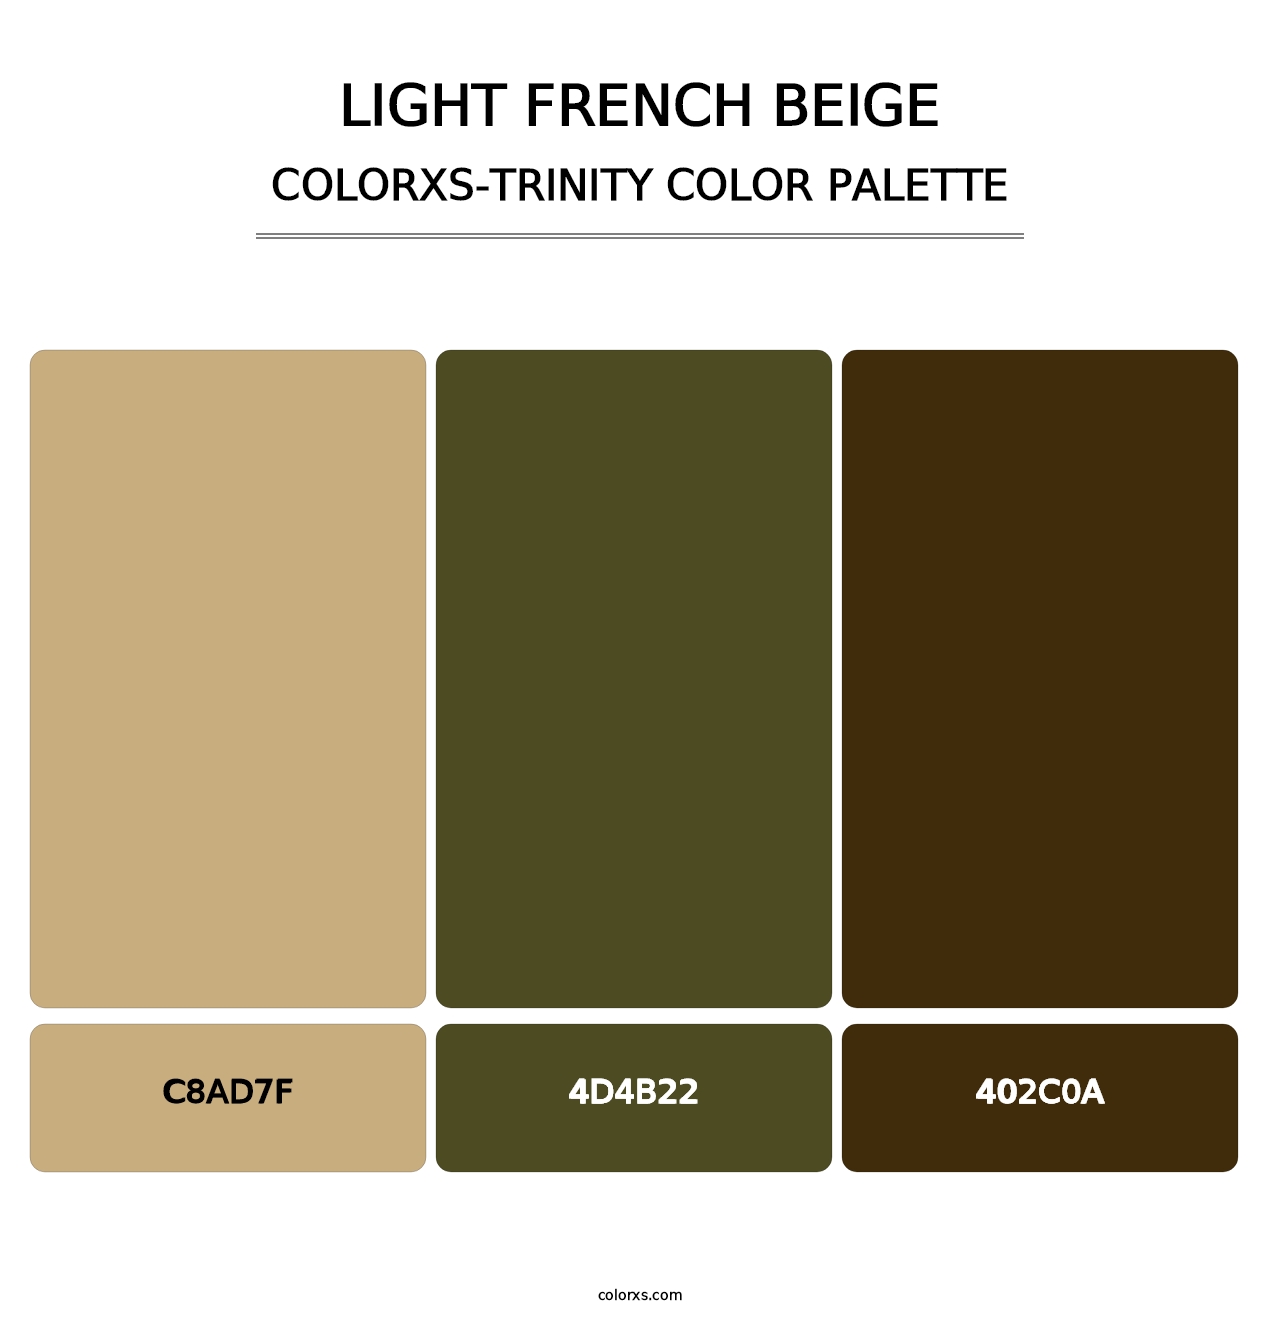 Light French Beige - Colorxs Trinity Palette